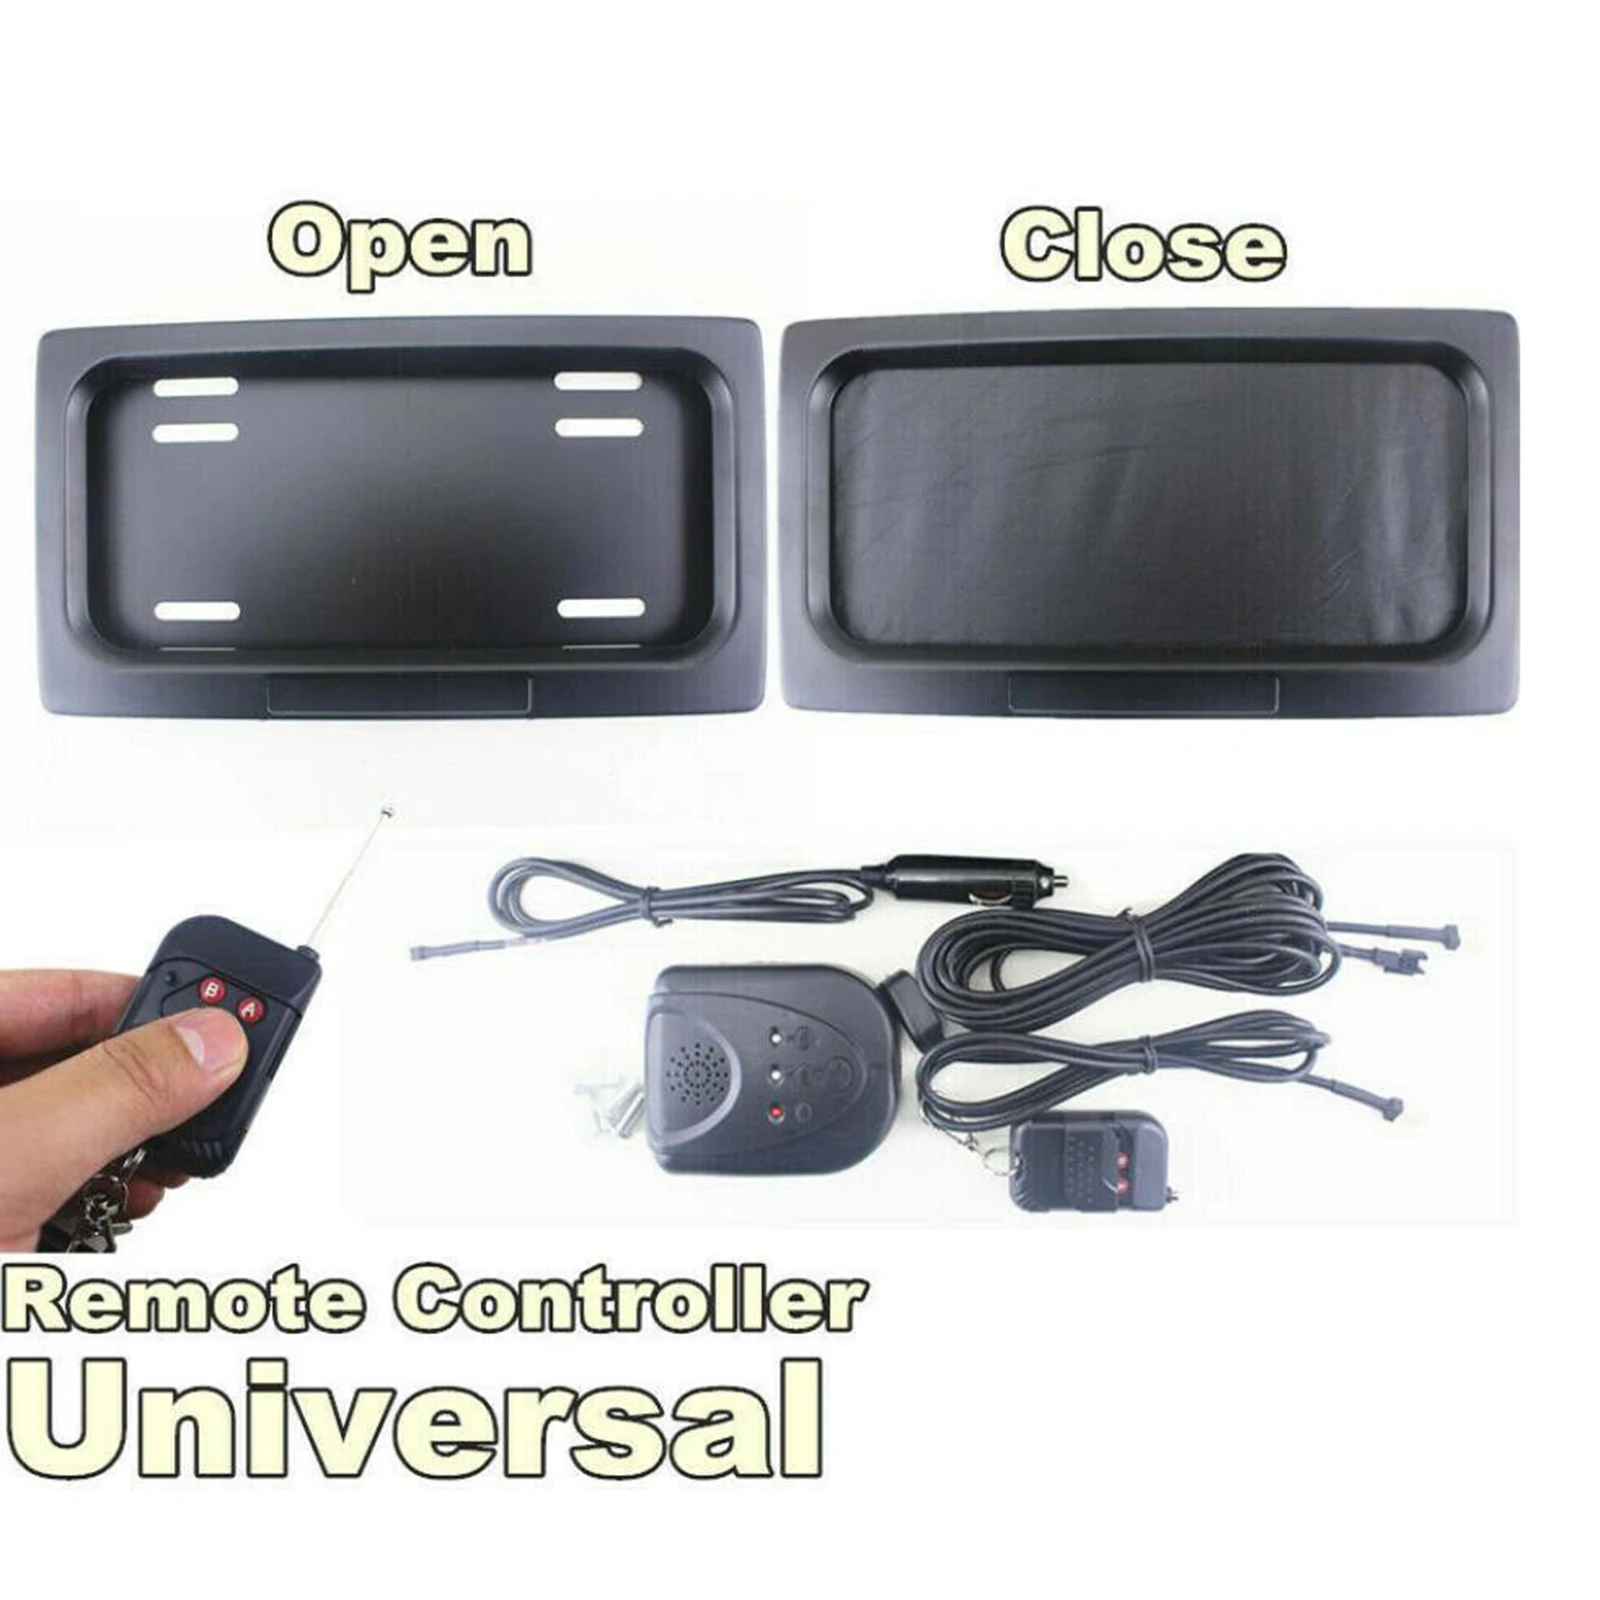 Remote USA Type Vehicle License Plate Frame Roller Blinds for Car Shows